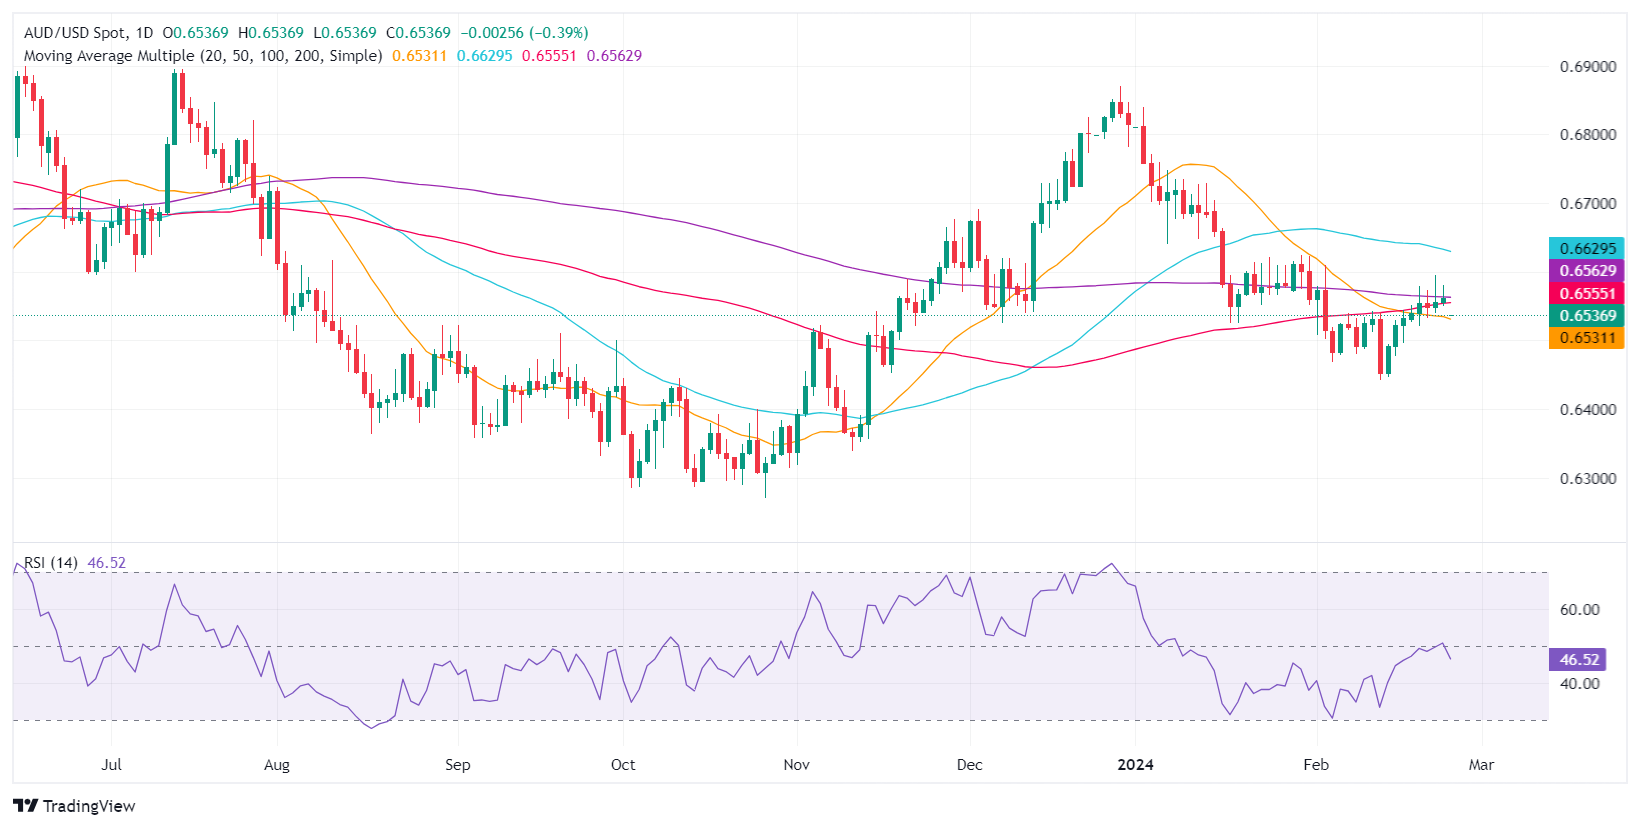 AUD/USD Price Analysis: Technical outlook